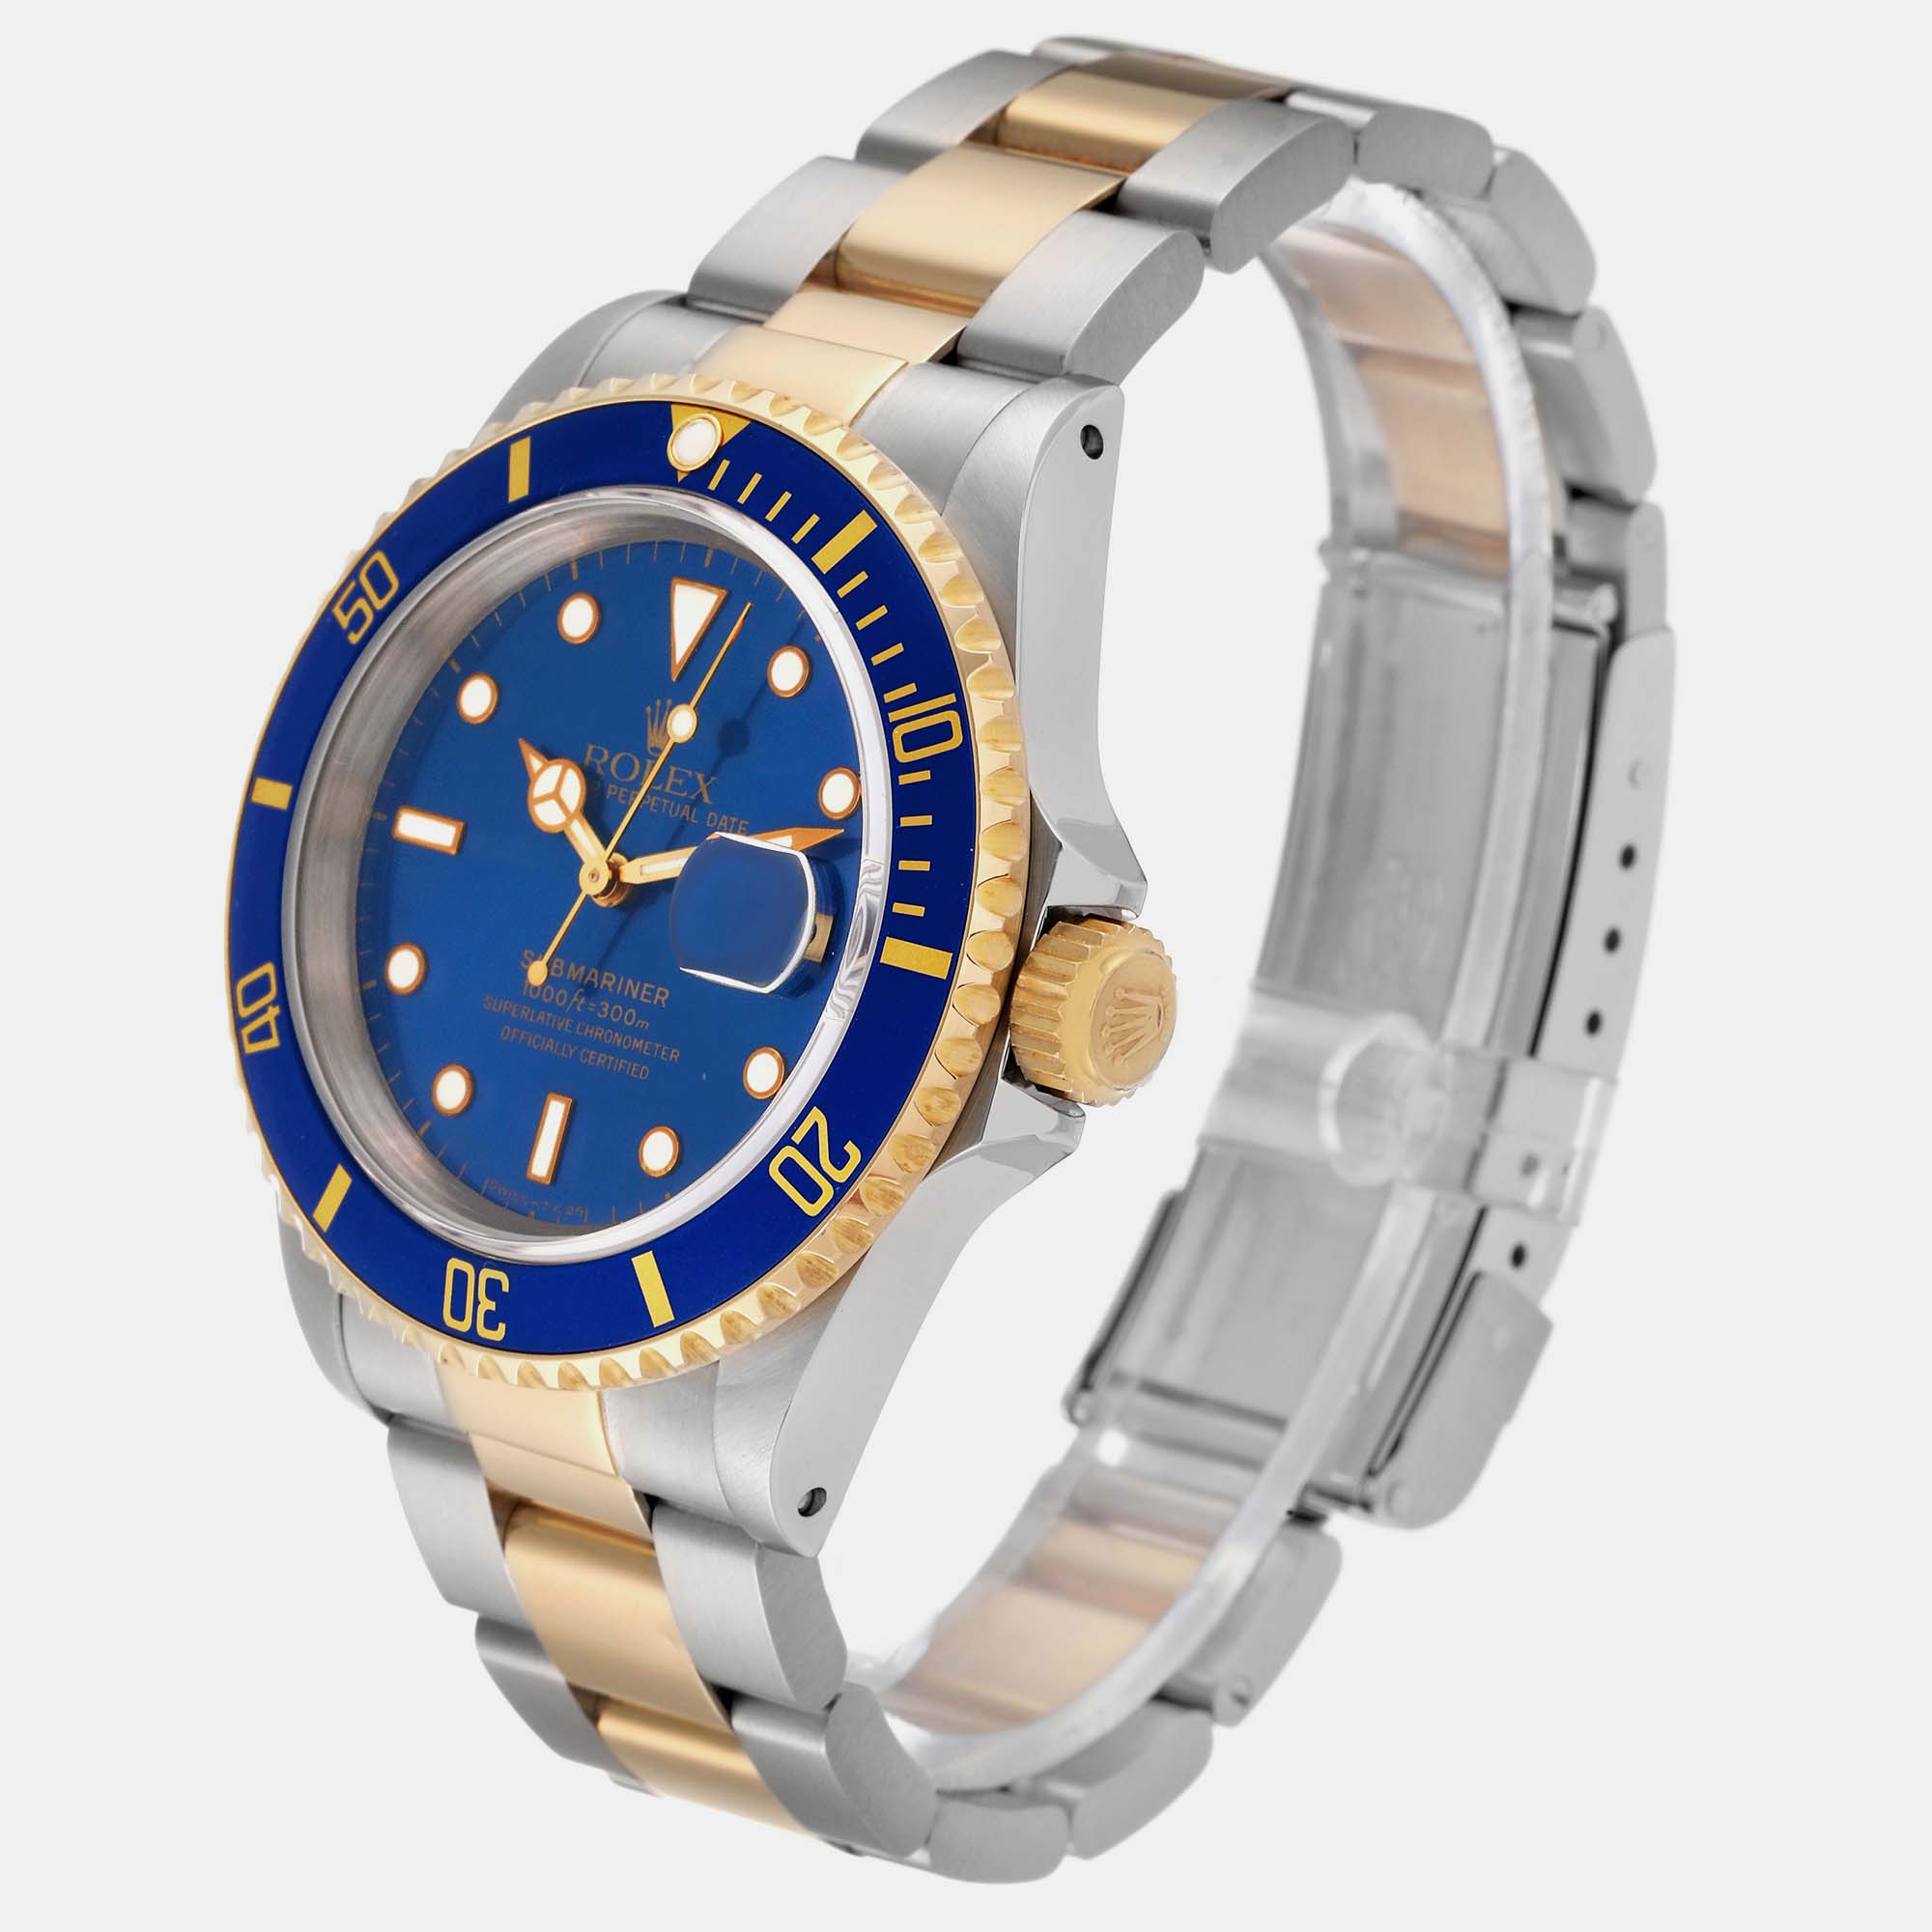 Rolex Submariner Blue Dial Steel Yellow Gold Mens Watch 16613 40 Mm